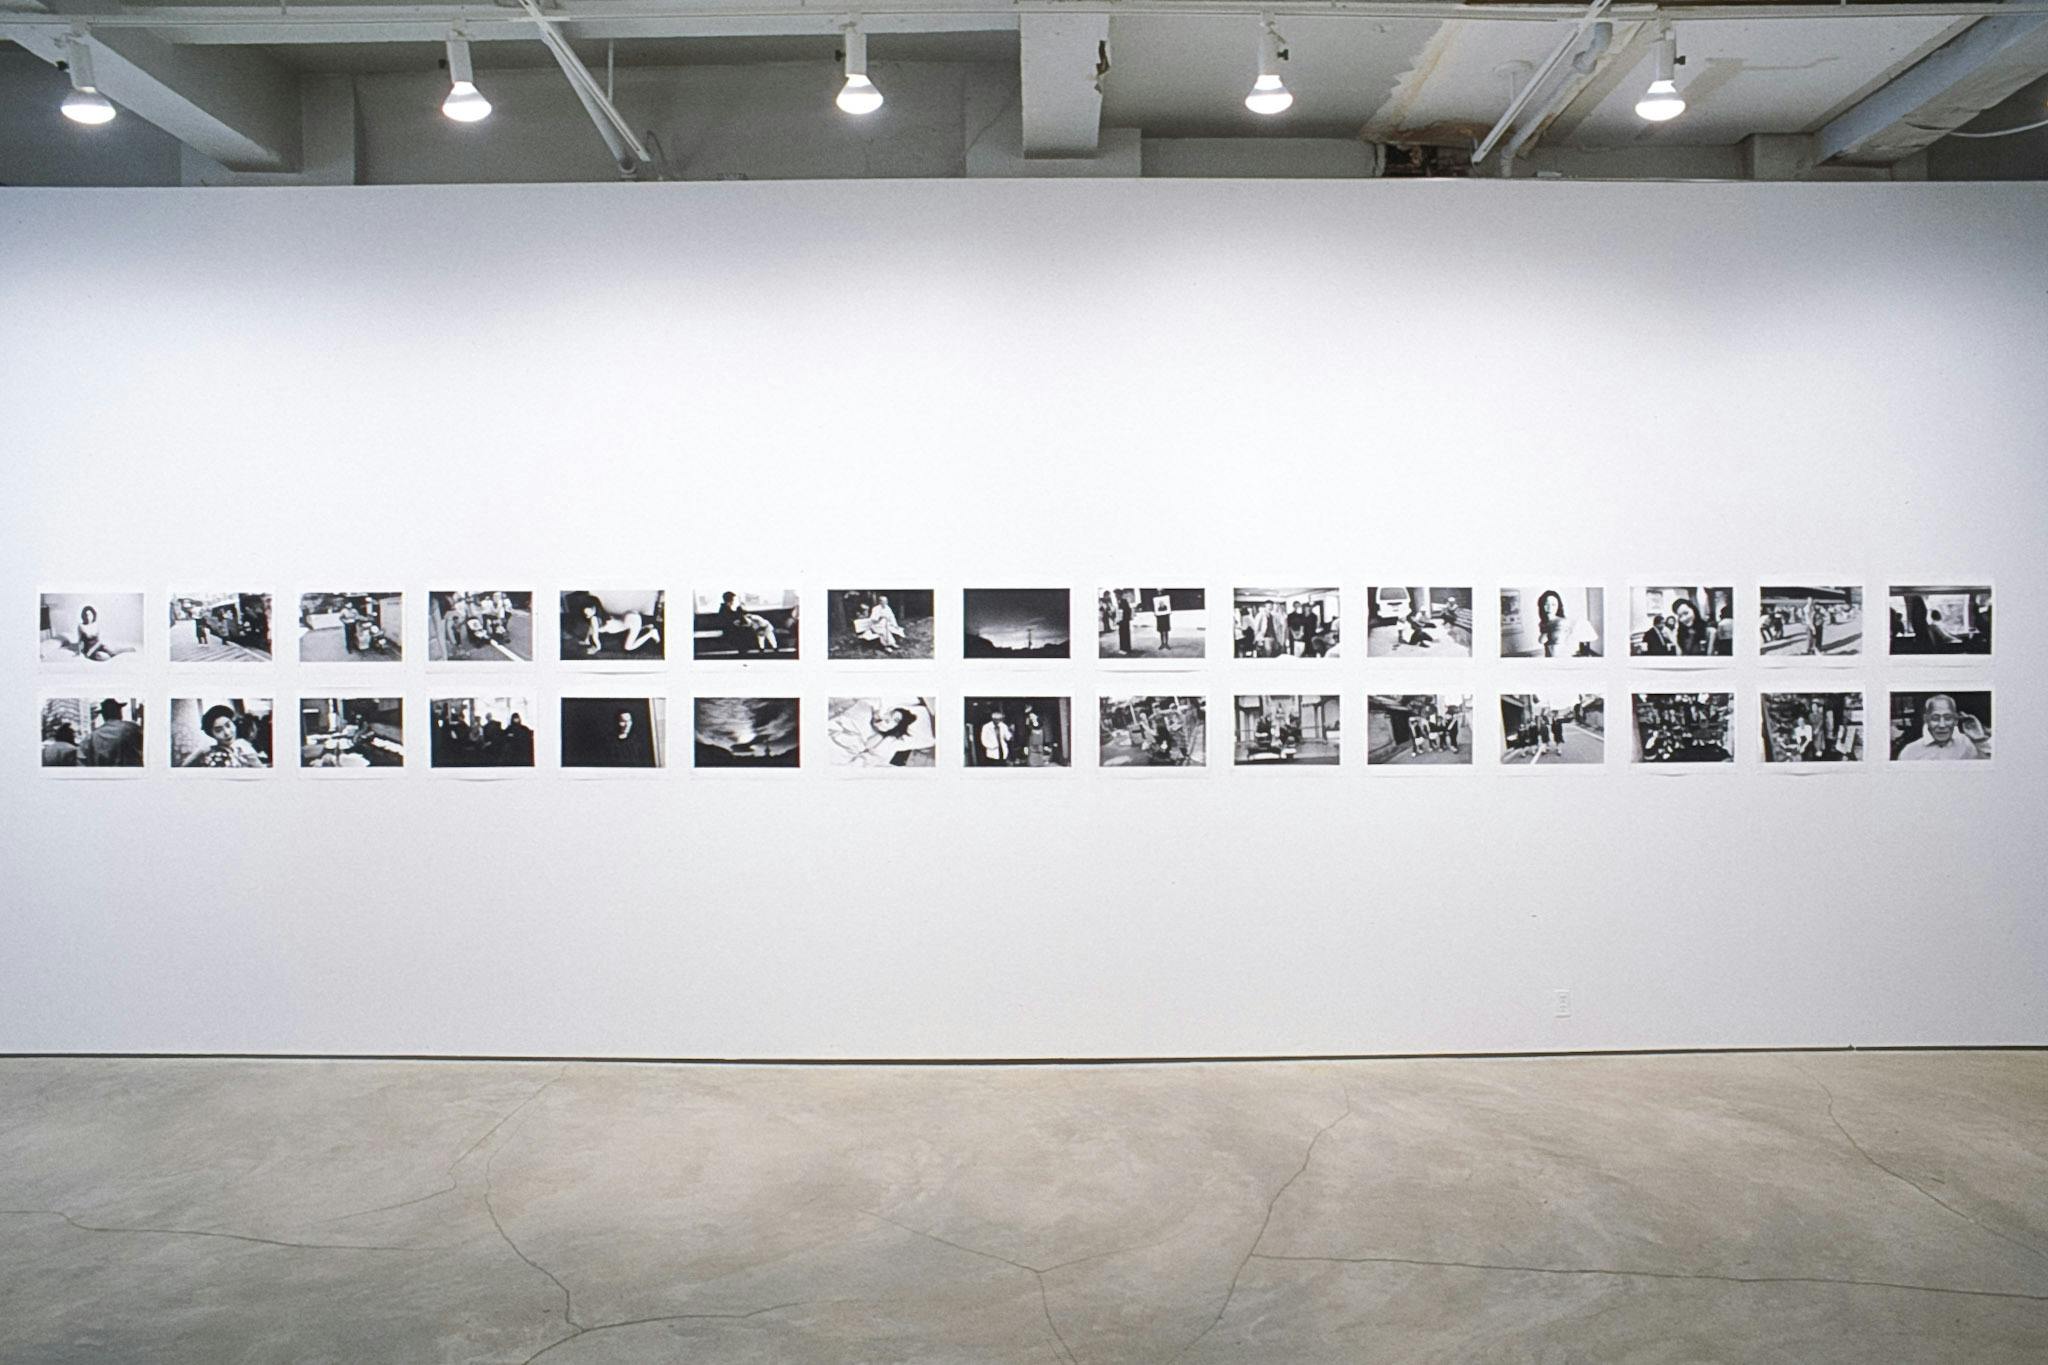 Black and white photographs are installed on a gallery wall. Many of them show human figures in various outside settings. One row contains 2 pictures and 14 rows are visible in this photograph.